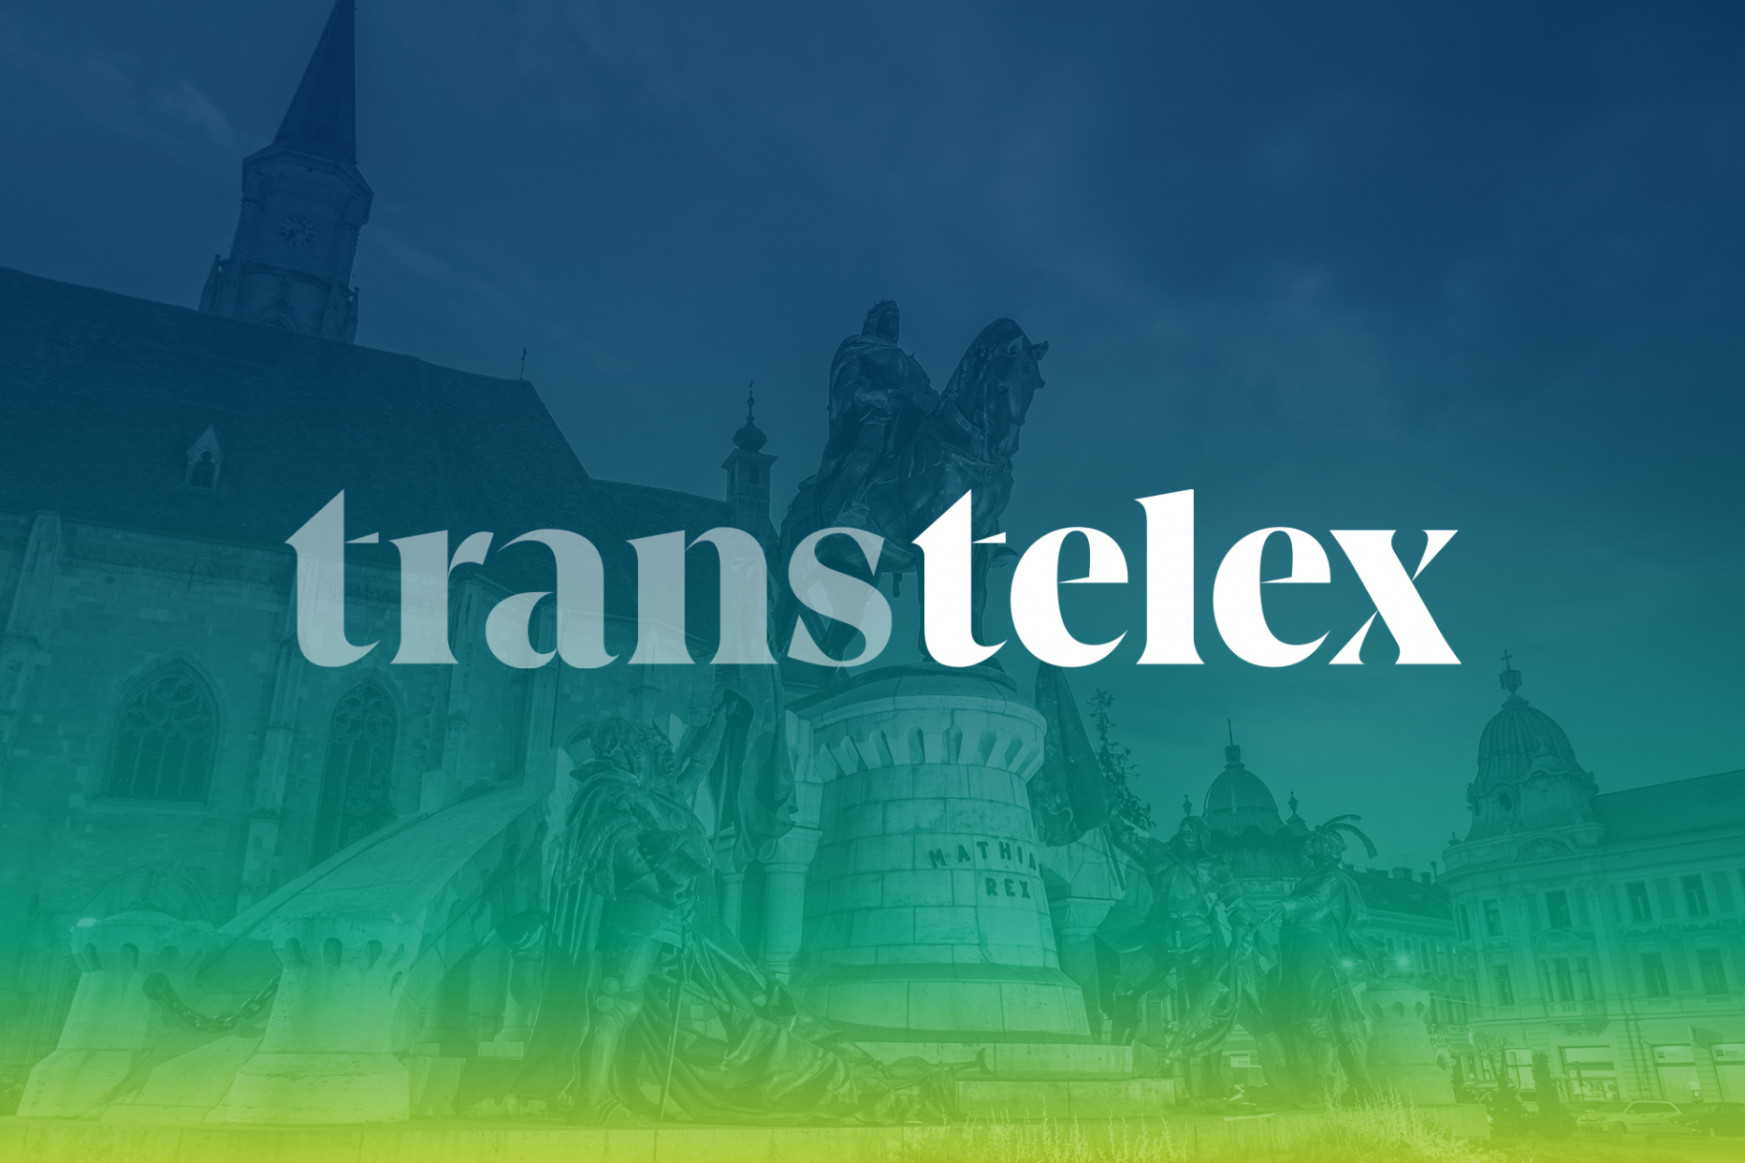 Entire editorial staff of Hungarian news outlet in Transylvania quits due to political pressure – here comes Telex's new project: Transtelex